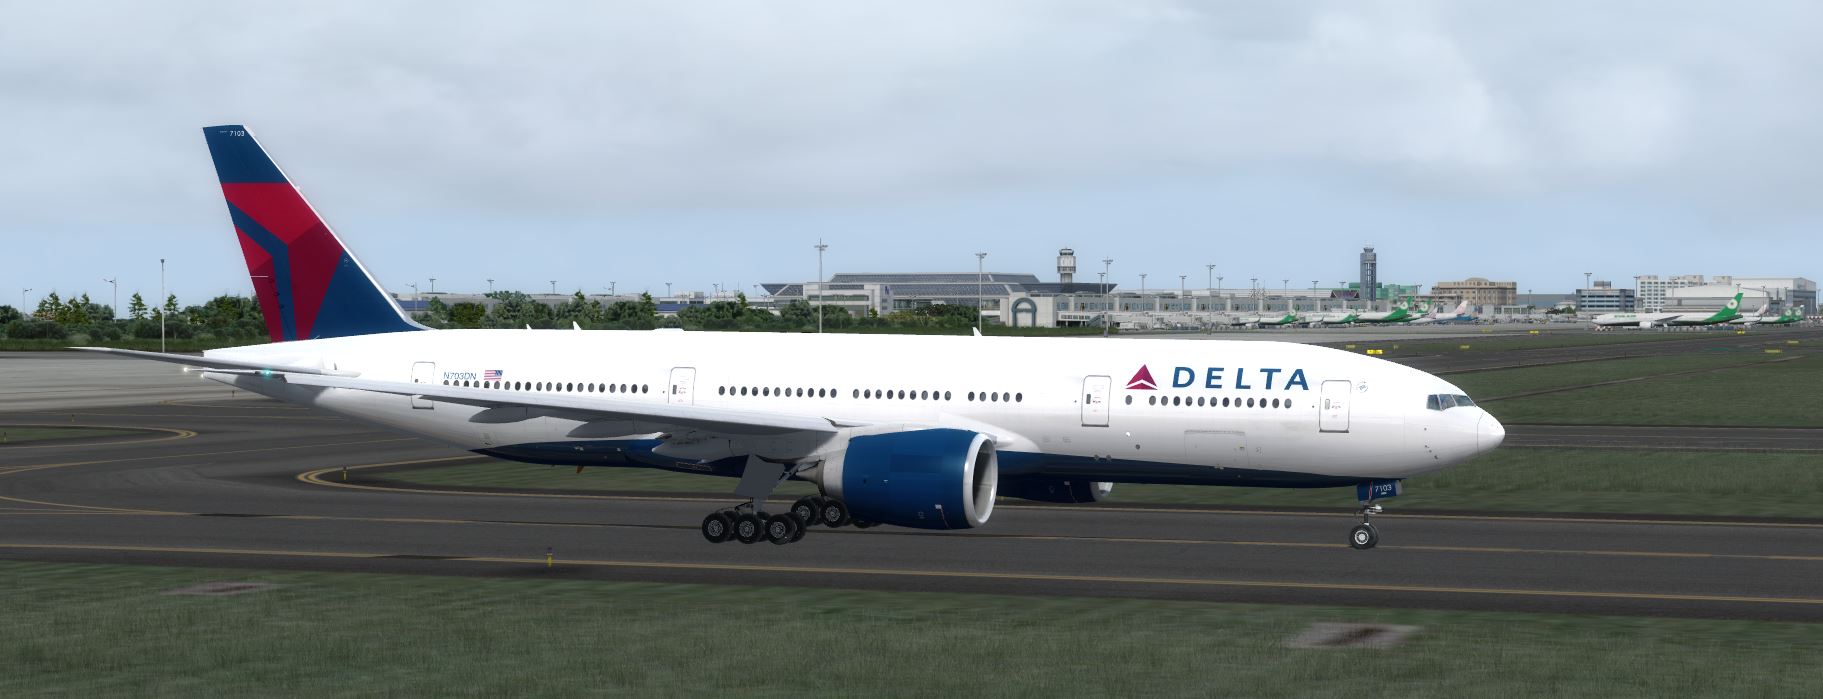 B777-200 Delta Airlines Standard Livery-6808 